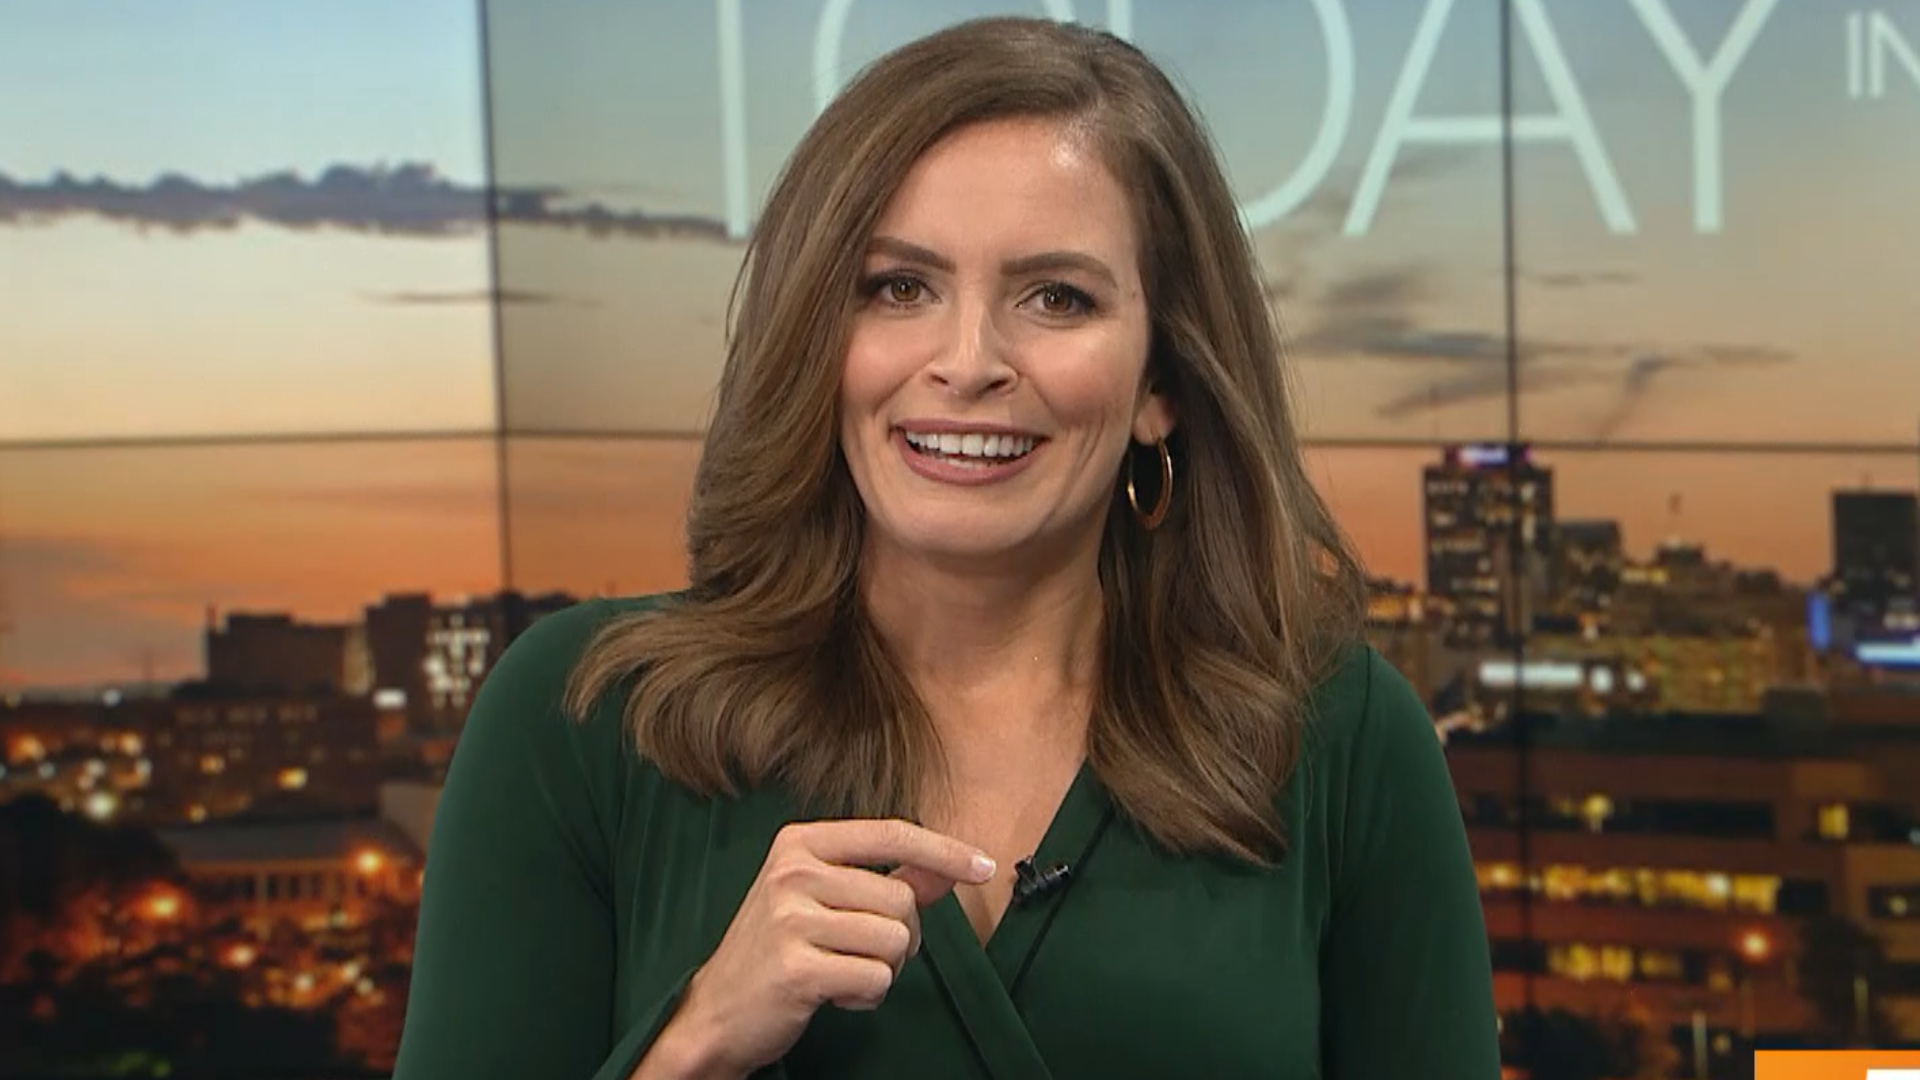 Boy! Allie shared the exciting news on air Friday morning that she's expecting baby No. 2